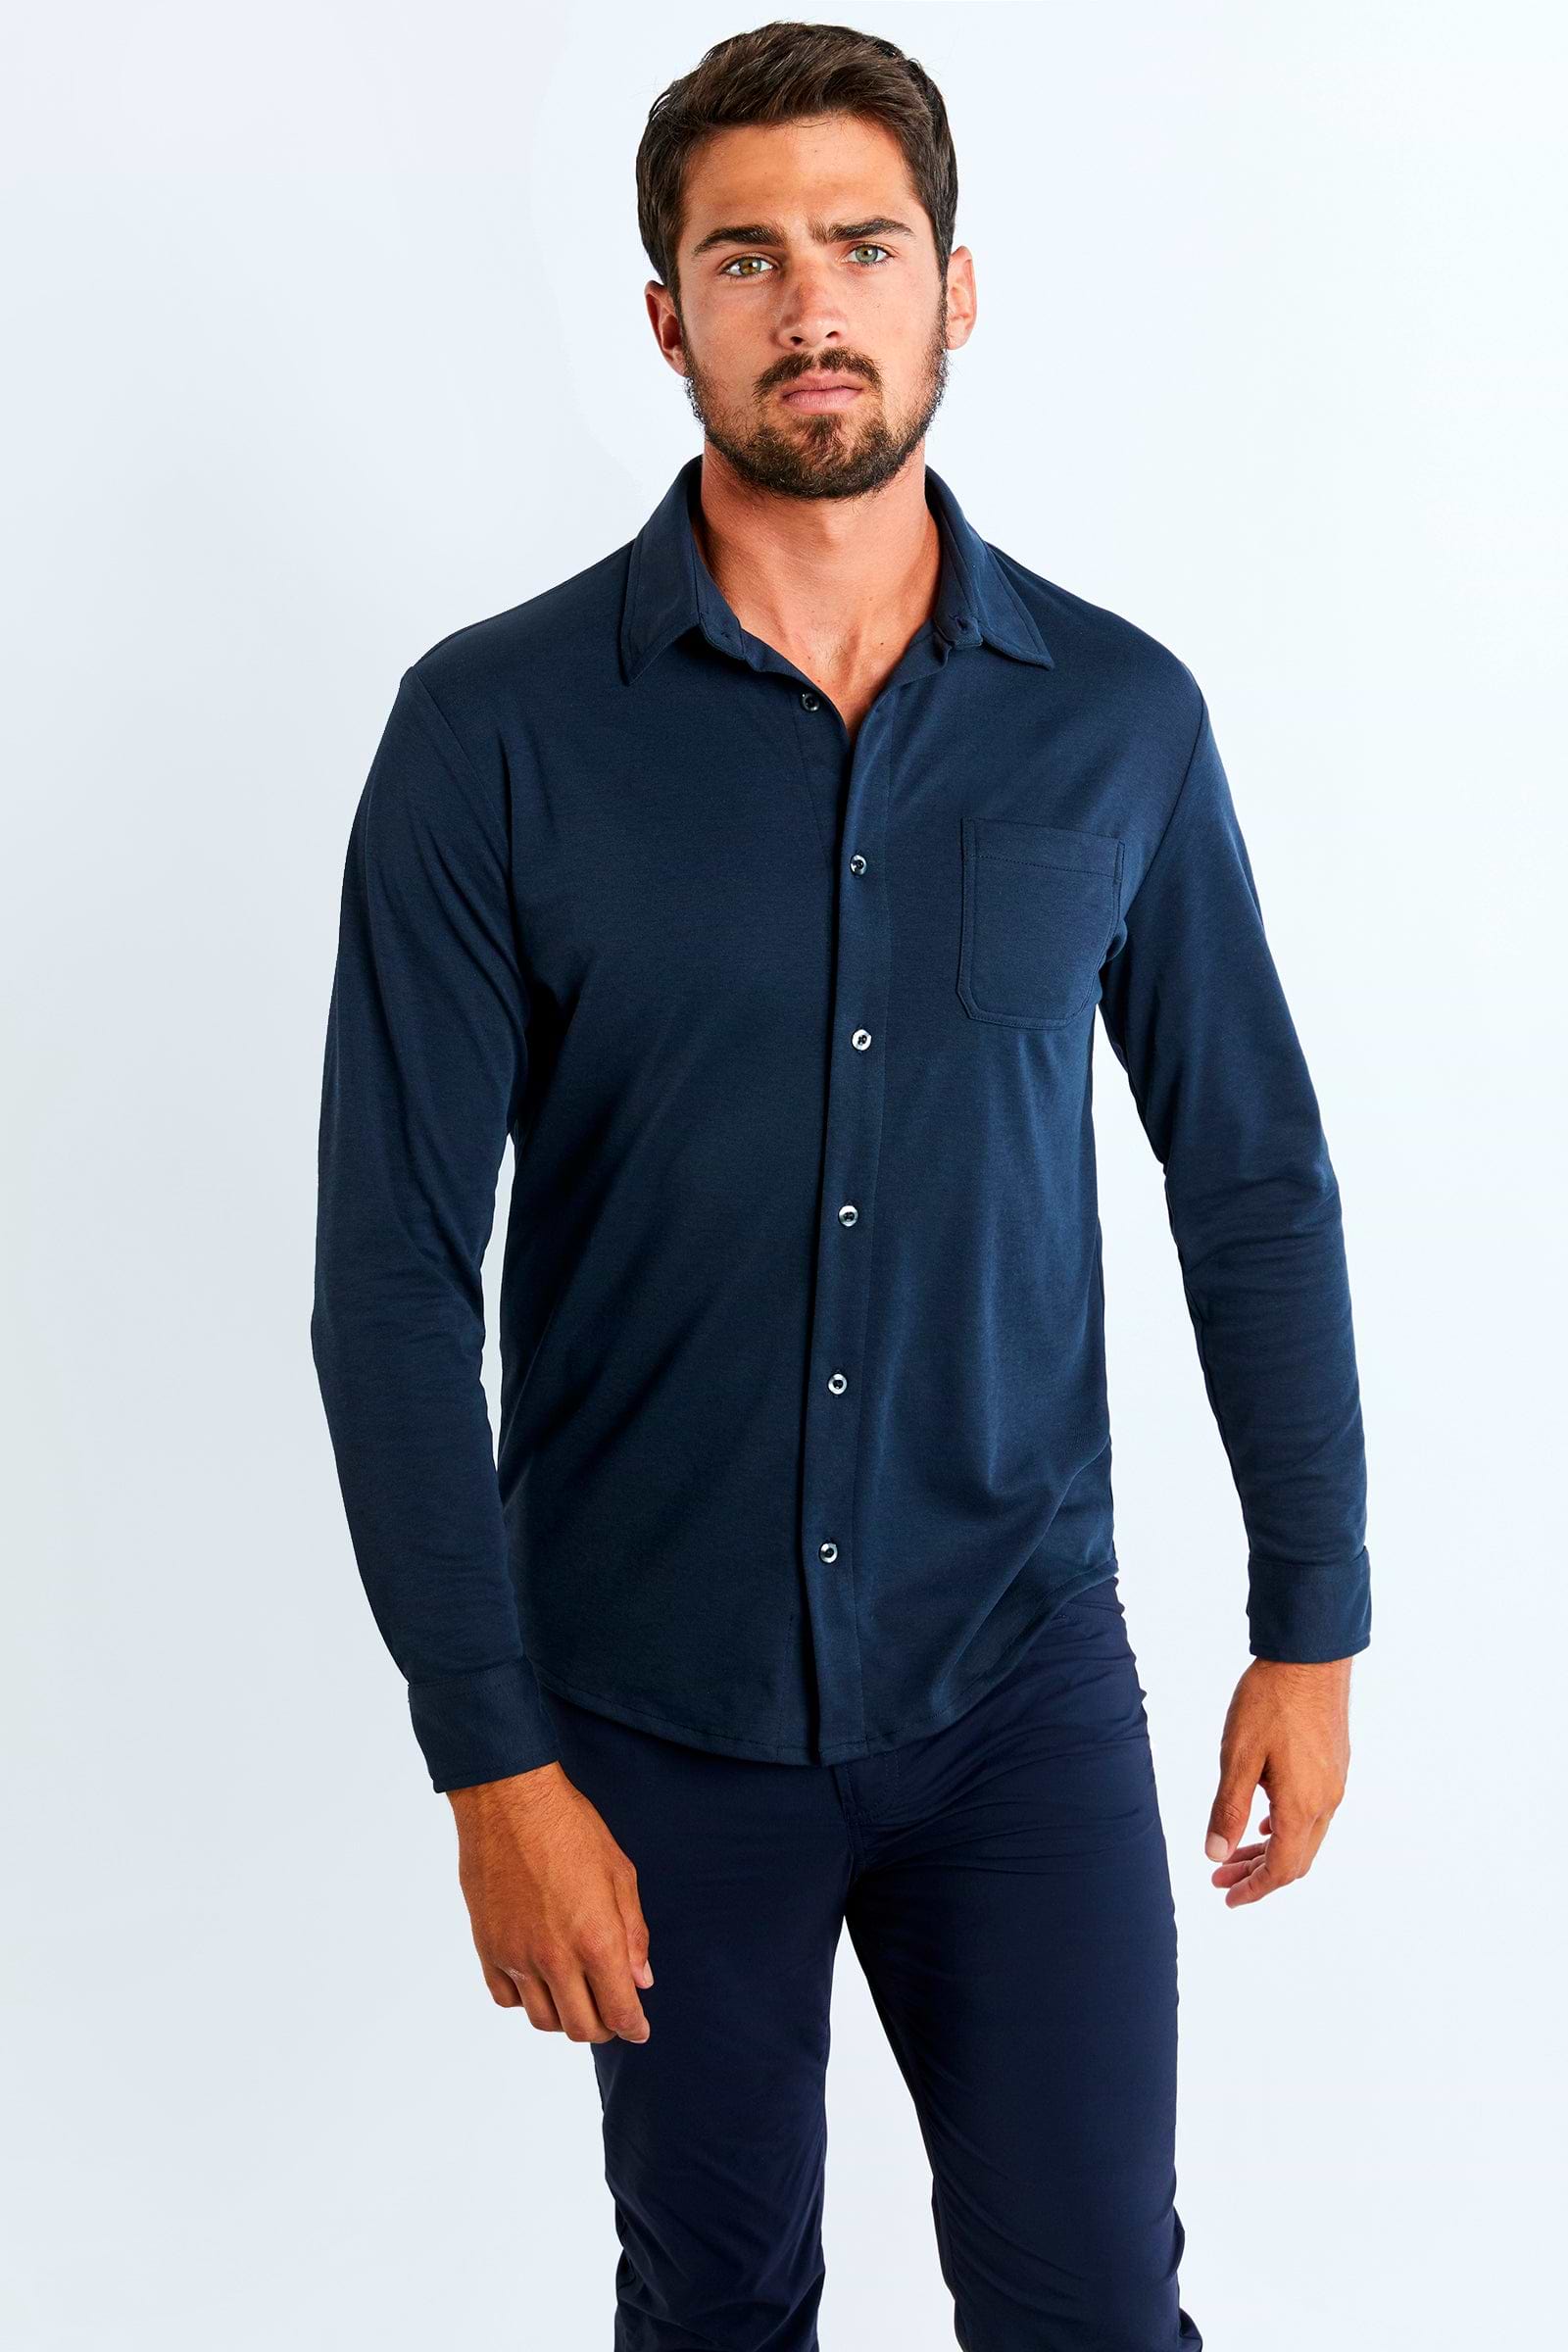 Elevated Performance Menswear  Button-Up Long-Sleeve Shirt